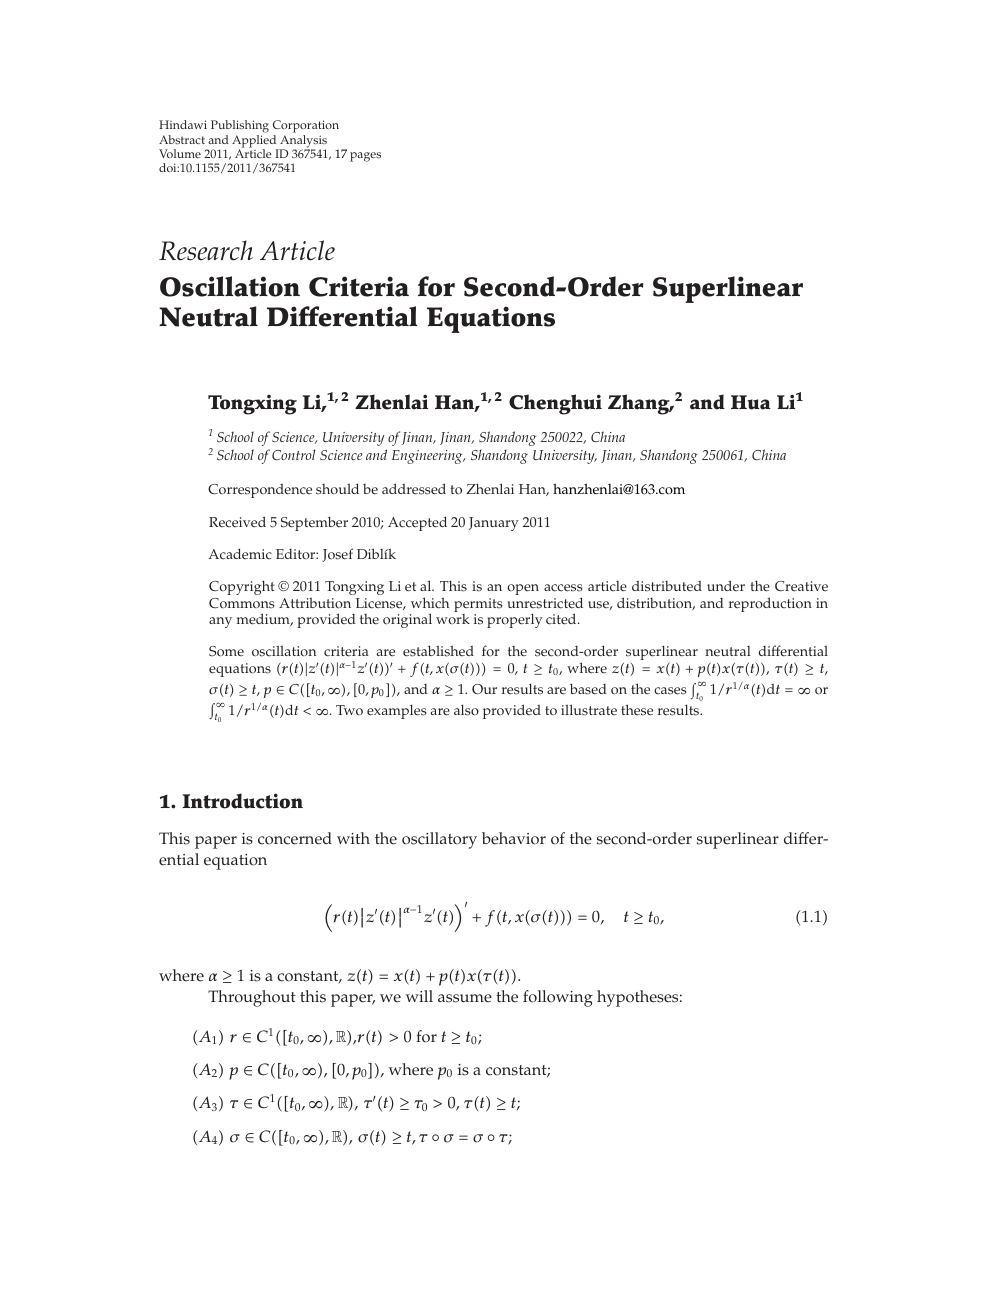 Oscillation Criteria For Second Order Superlinear Neutral Differential Equations Topic Of Research Paper In Mathematics Download Scholarly Article Pdf And Read For Free On Cyberleninka Open Science Hub